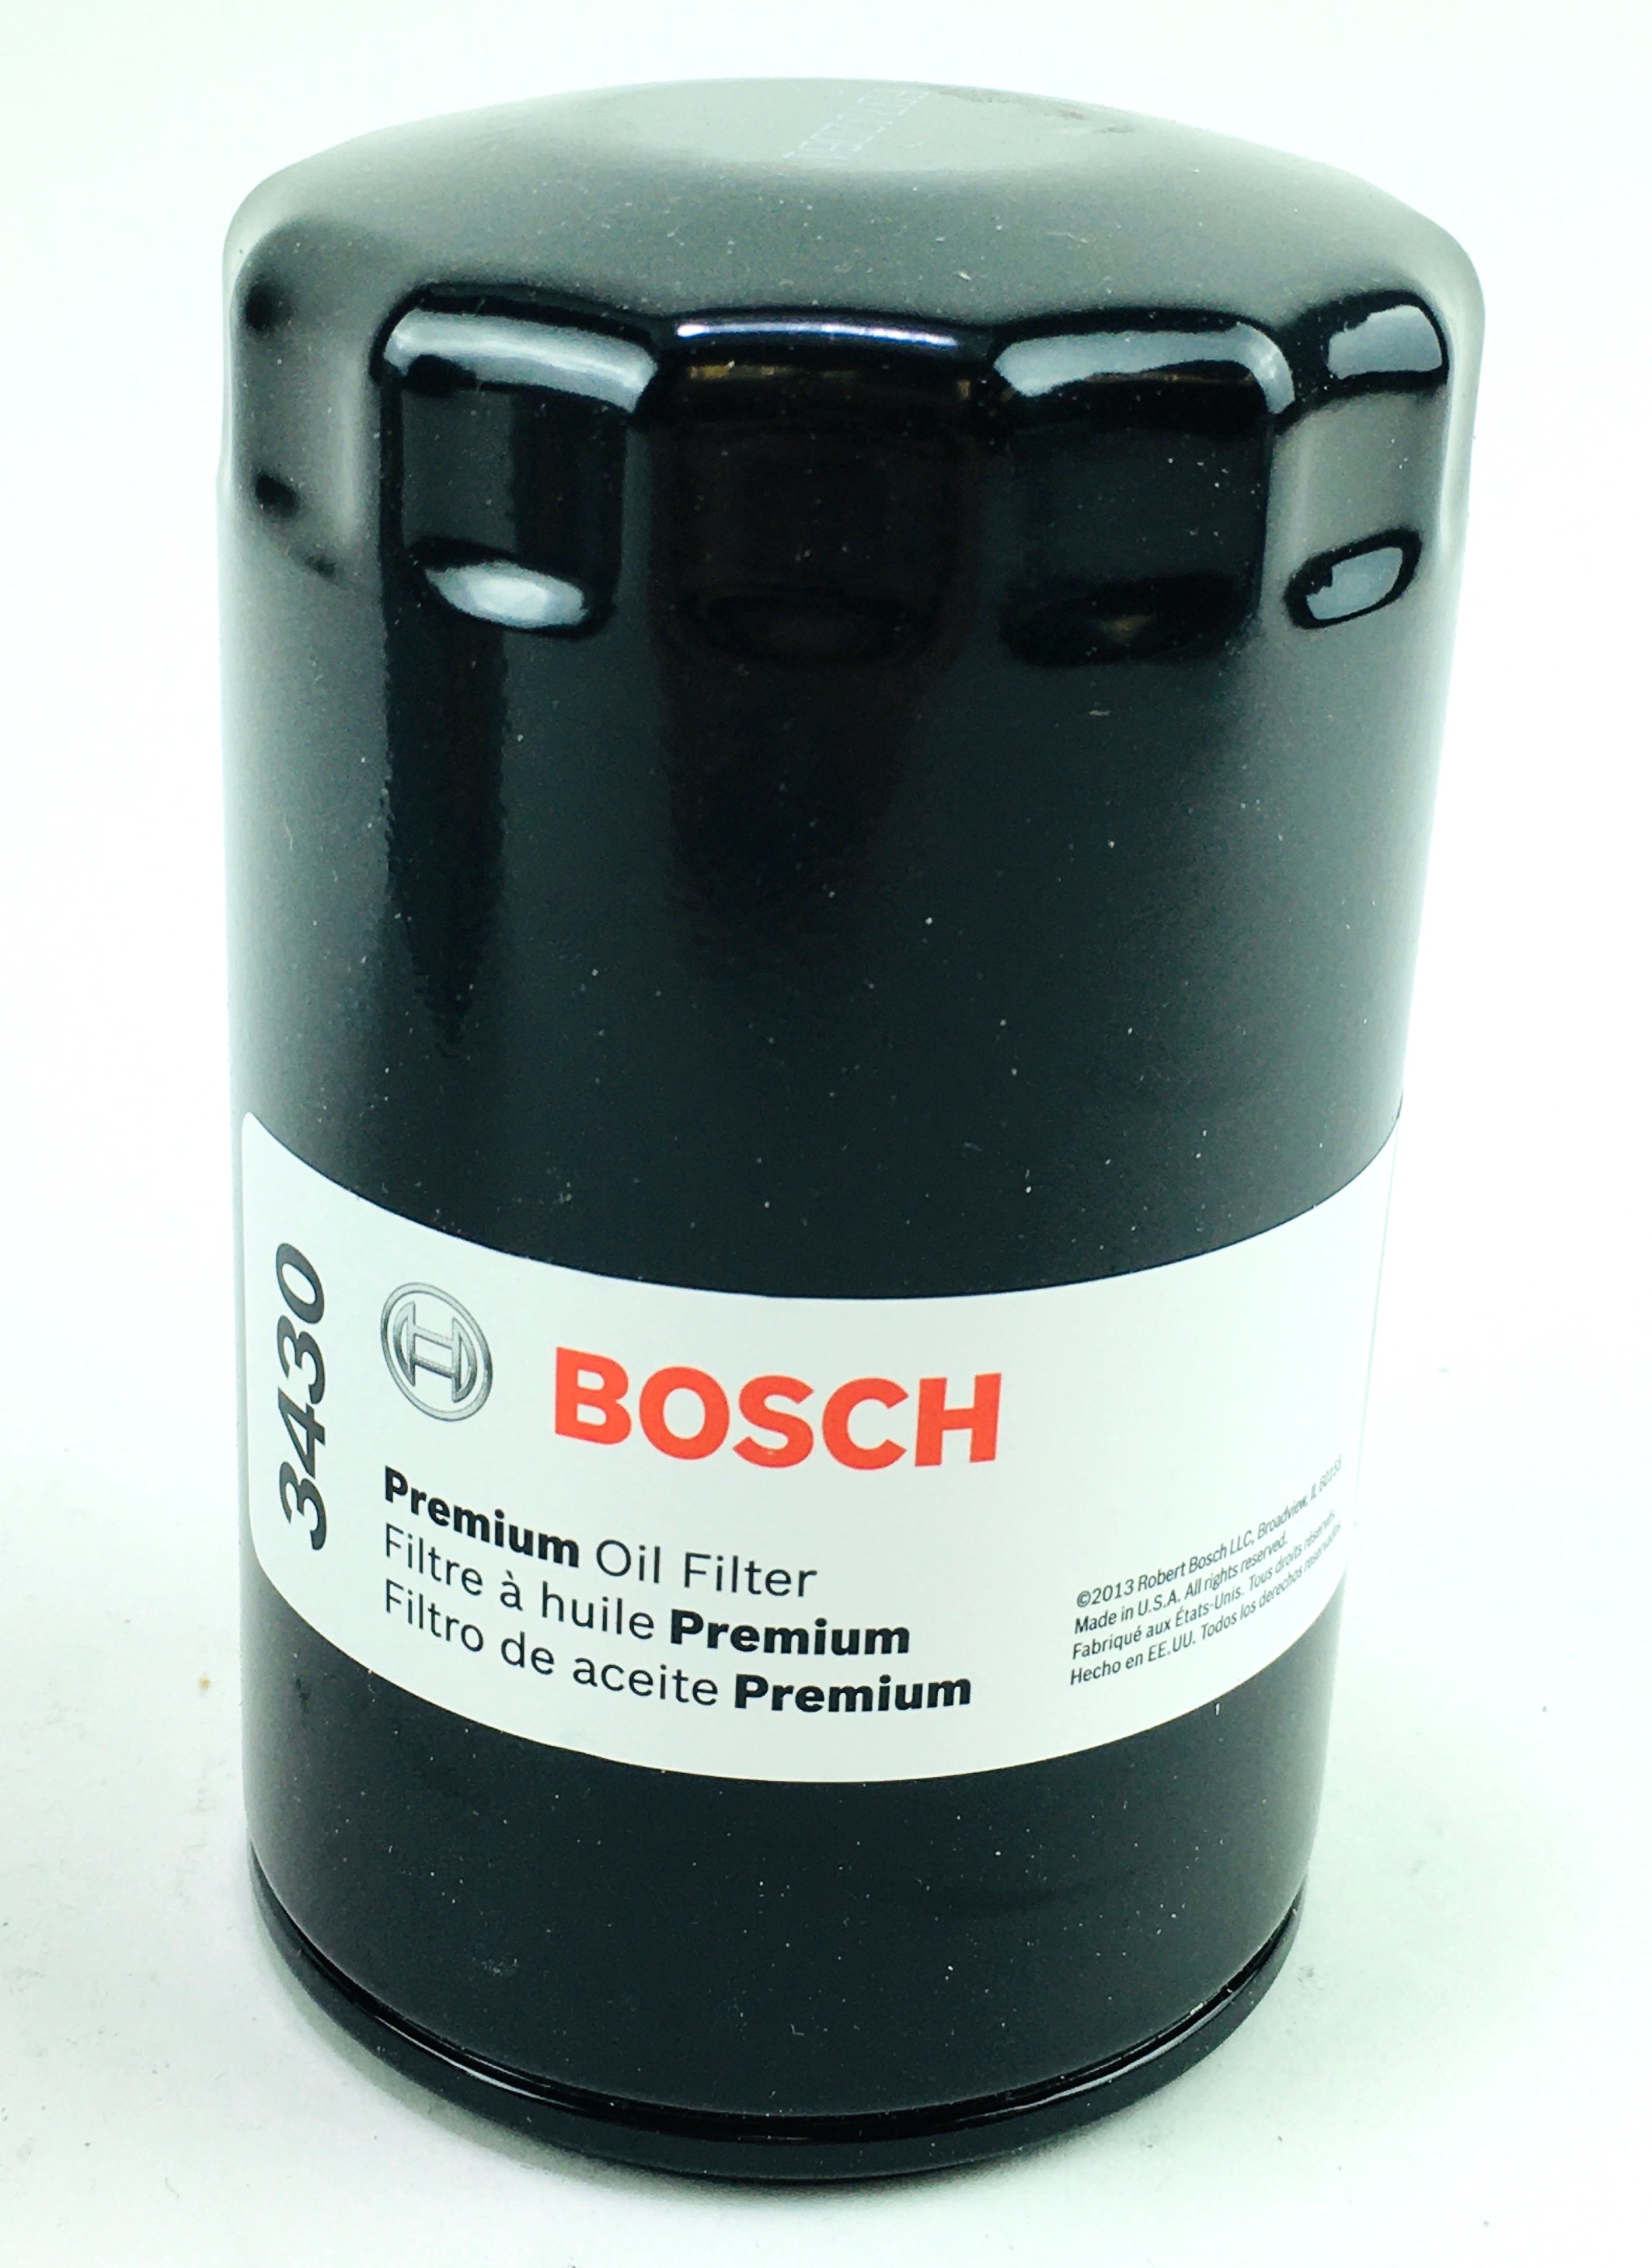 Lot of 4 New Genuine Bosch 3430 Premium Spin-On Engine Oil Filters Free Shipping - image 4